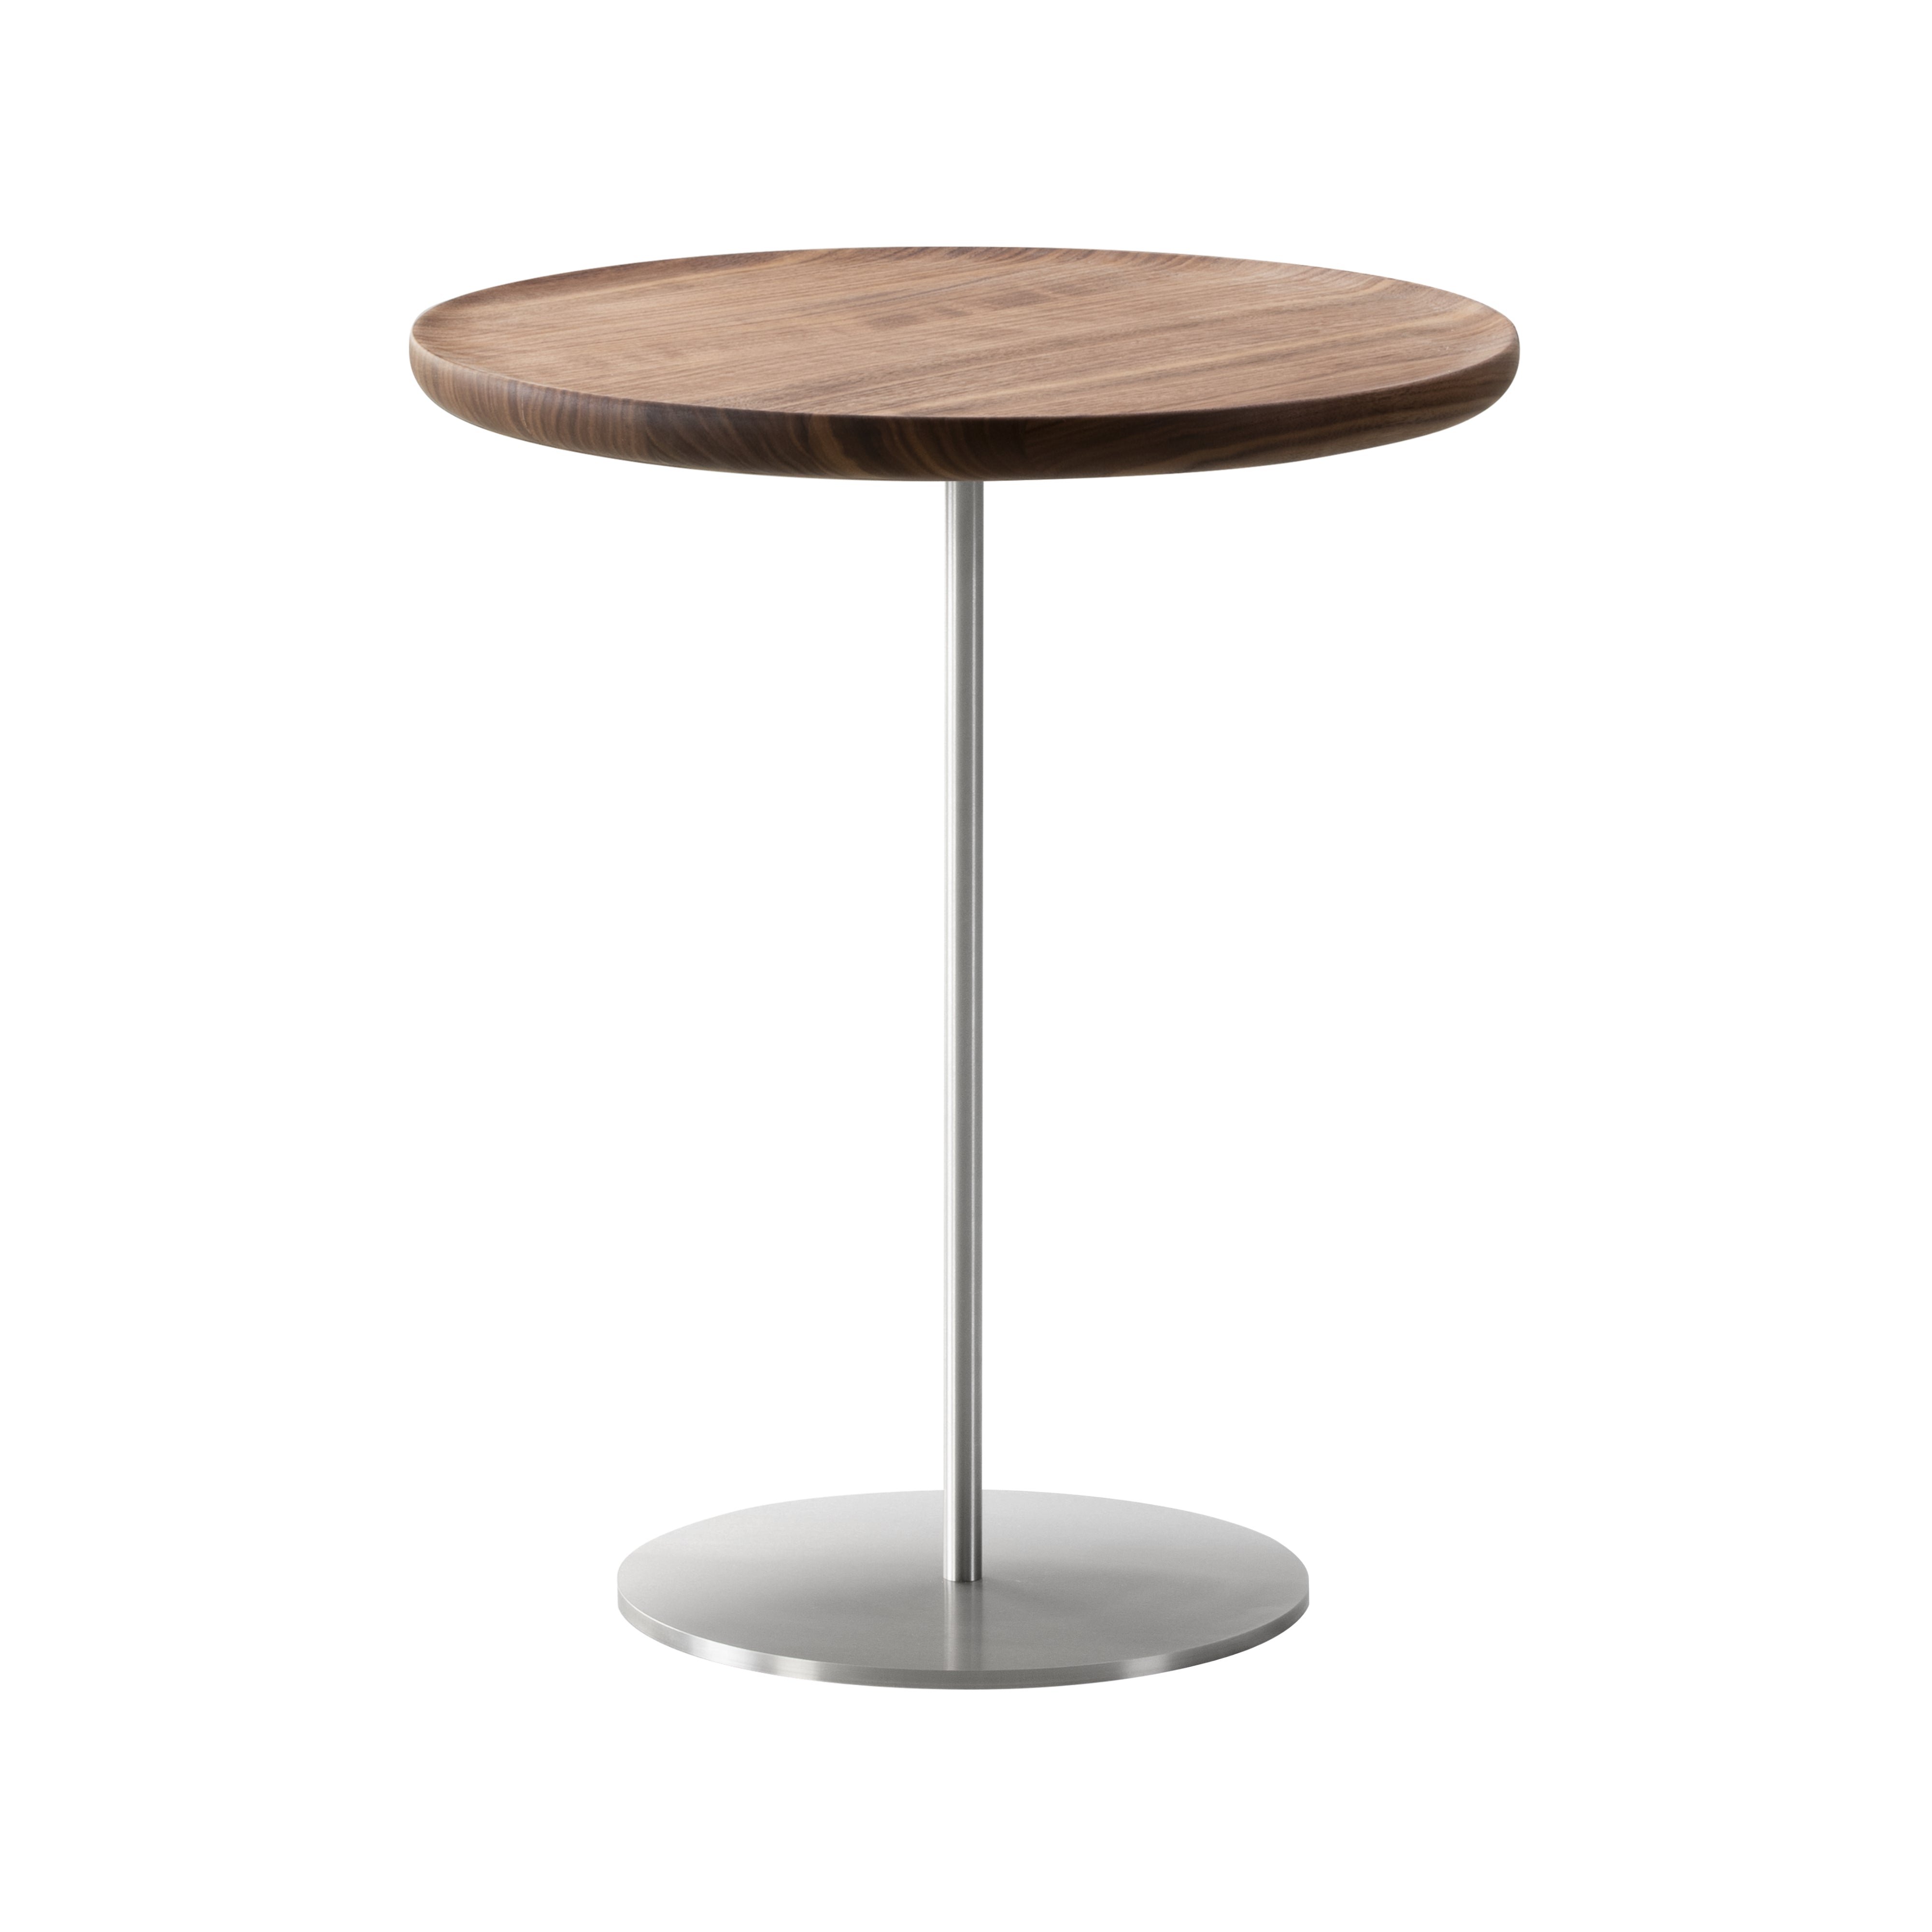 Pal Table: Large + High + Lacquered Walnut + Stainless Steel